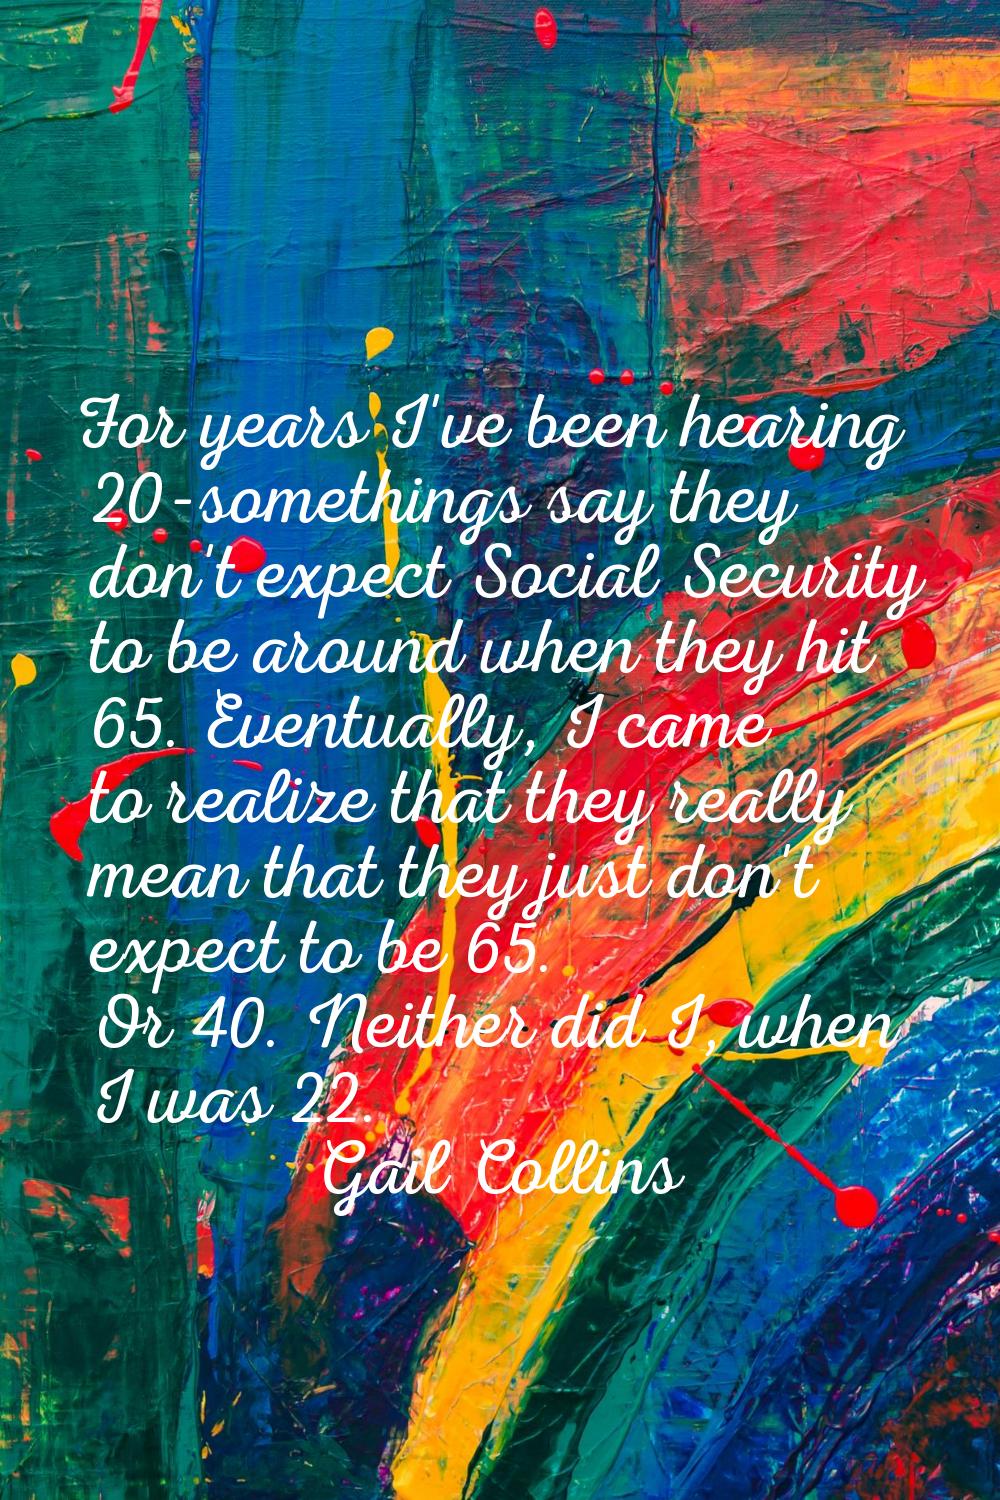 For years I've been hearing 20-somethings say they don't expect Social Security to be around when t